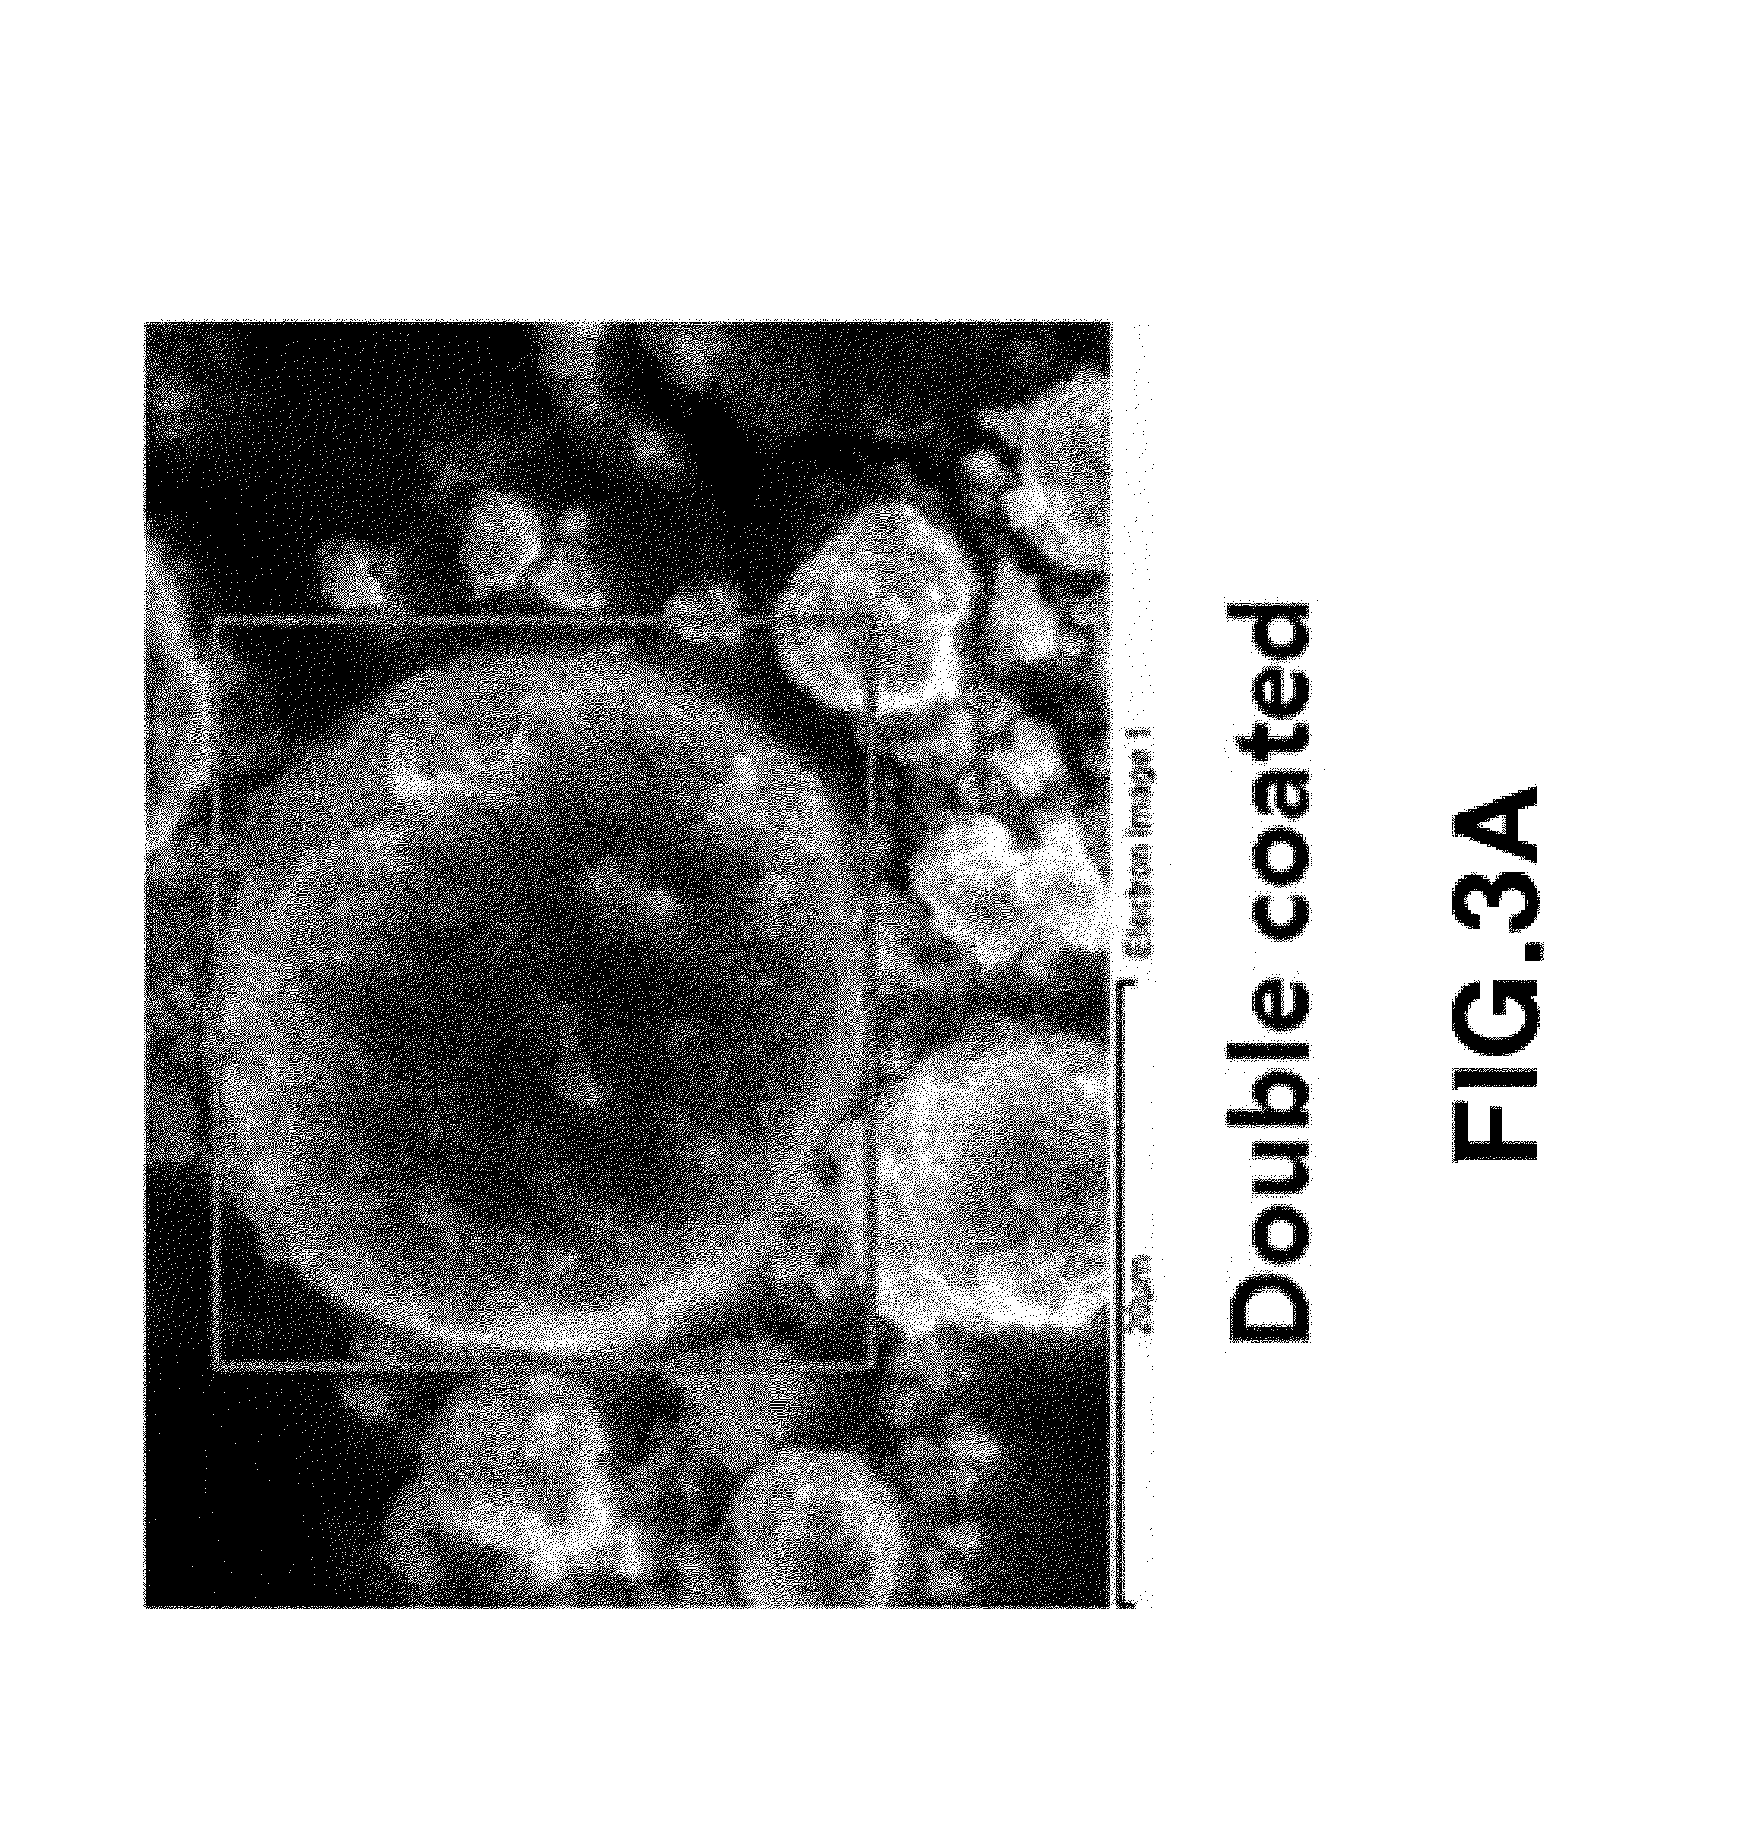 Surface-treated cathode active material and lithium secondary battery using the same